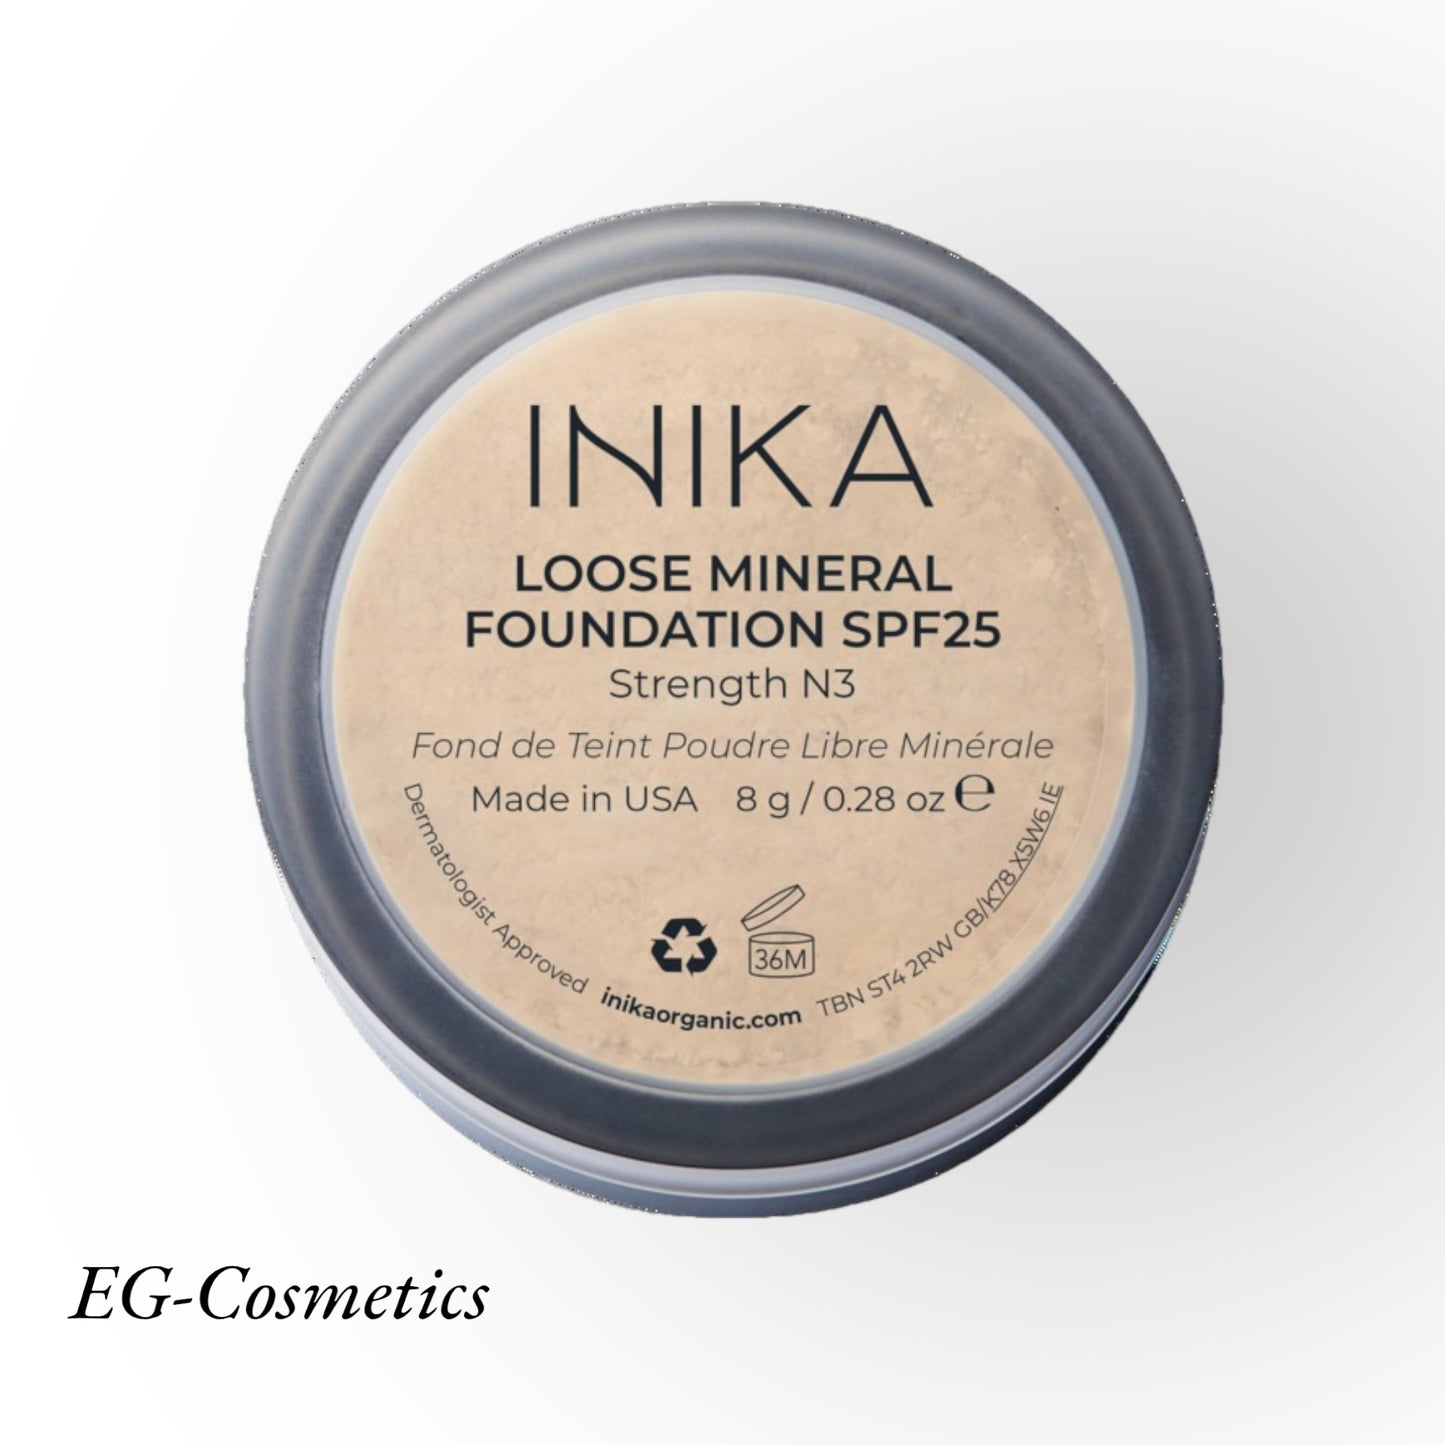 INIKA Certified Loose Mineral Foundation SPF25 8g STRENGTH